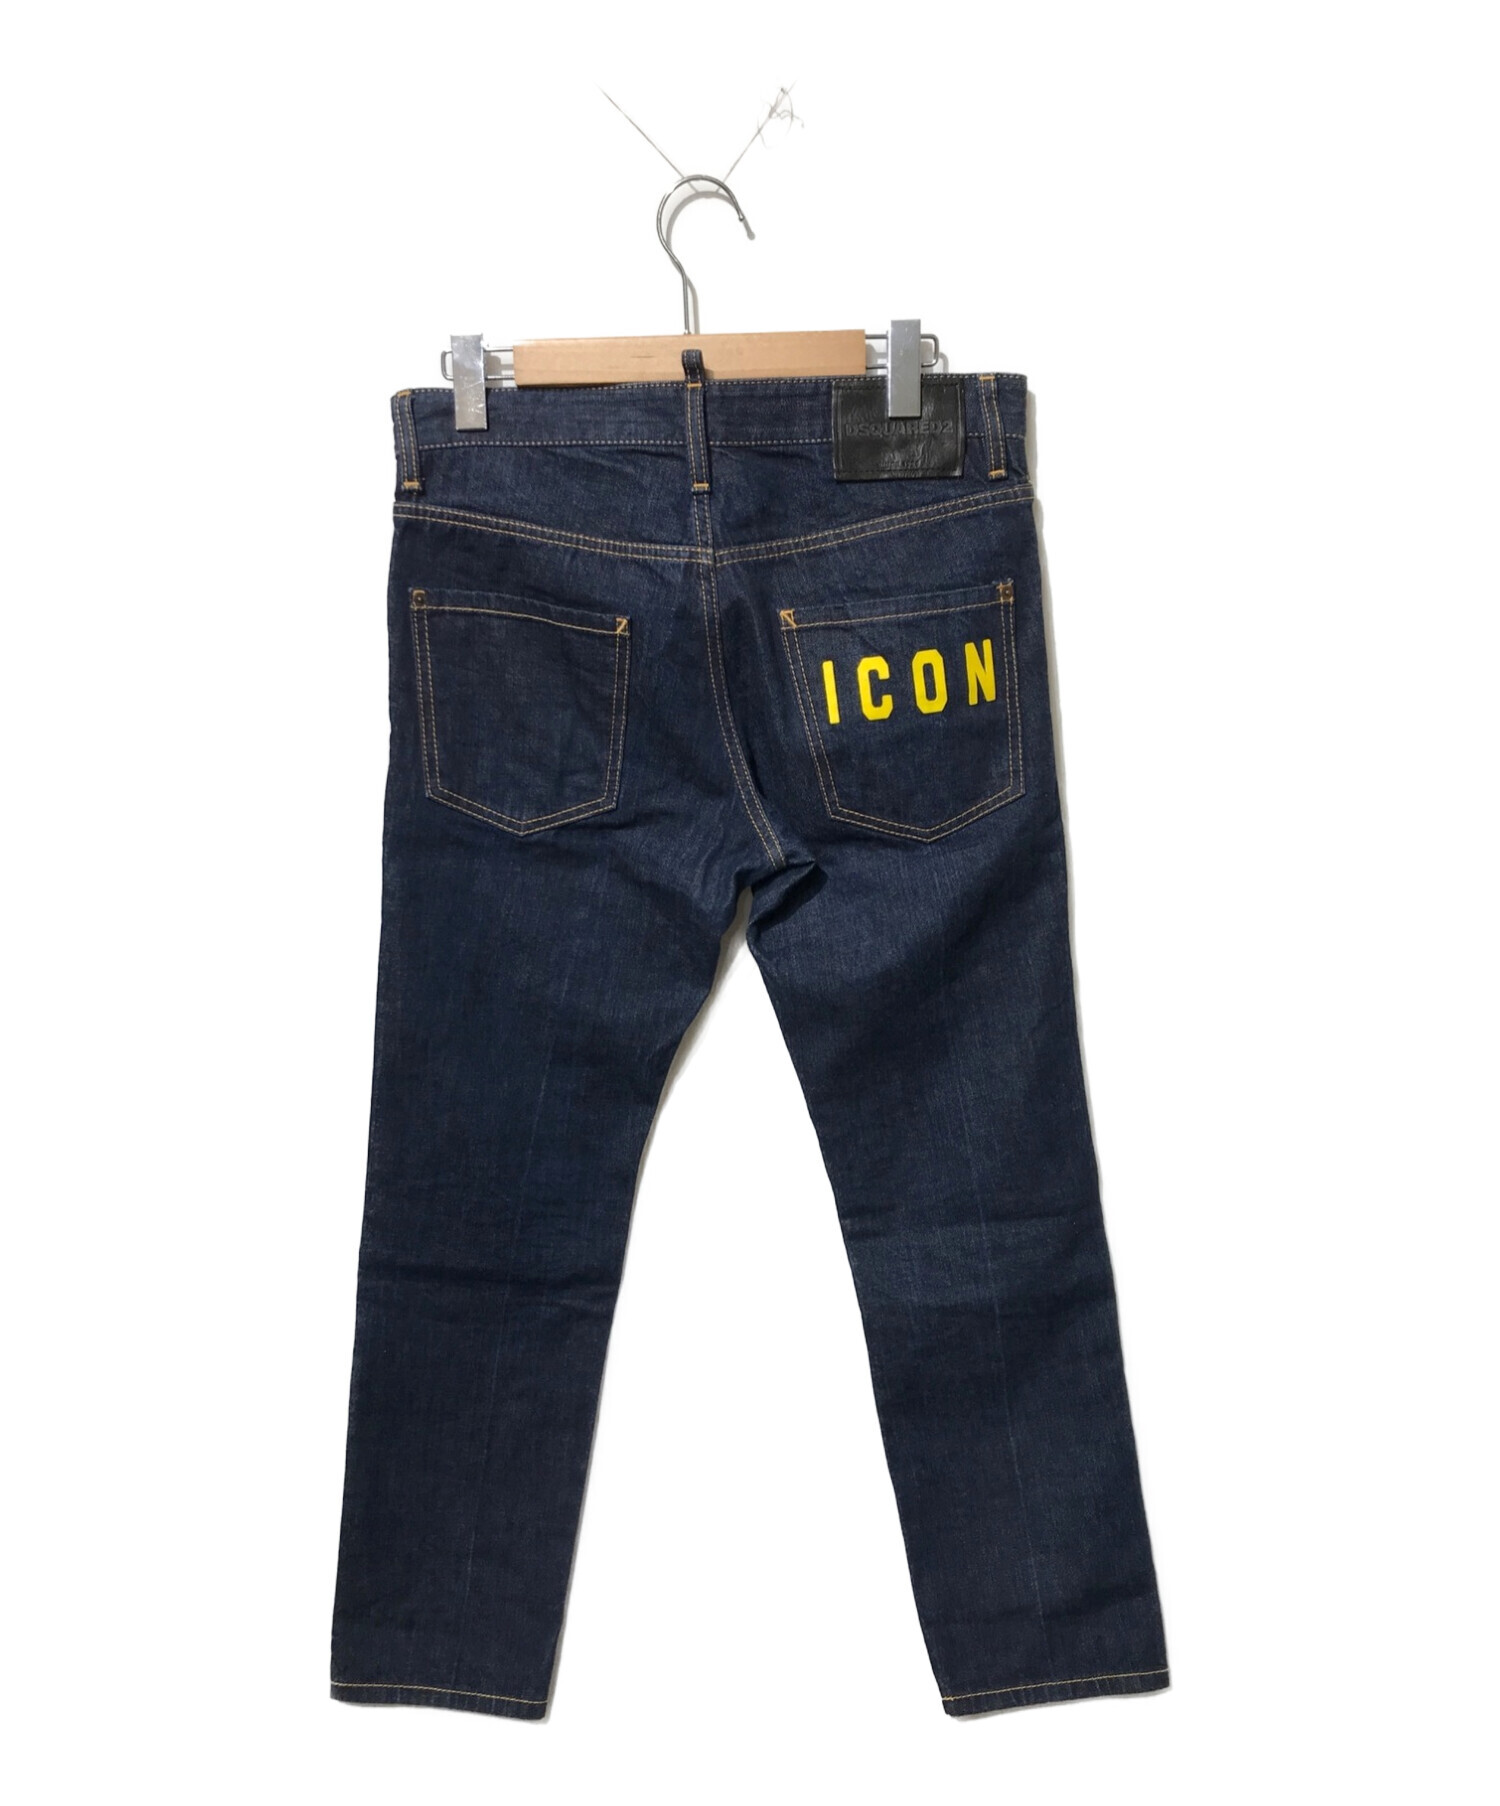 DSQUARED2 ICON Cool Guy Jean ディースクエアード